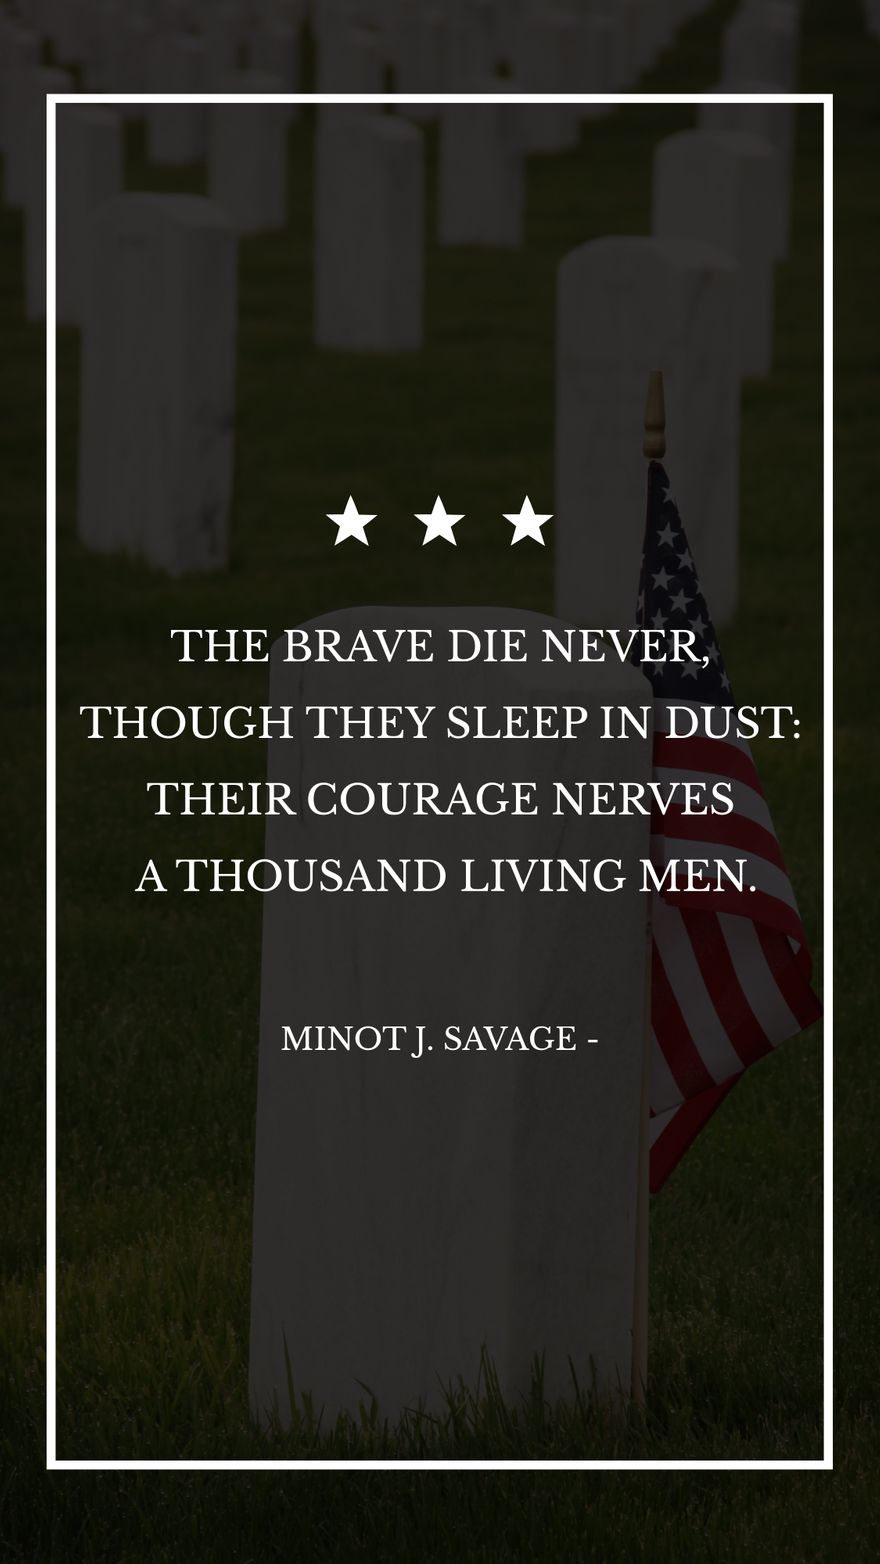 Free Minot J. Savage - The brave die never, though they sleep in dust: Their courage nerves a thousand living men. in JPG